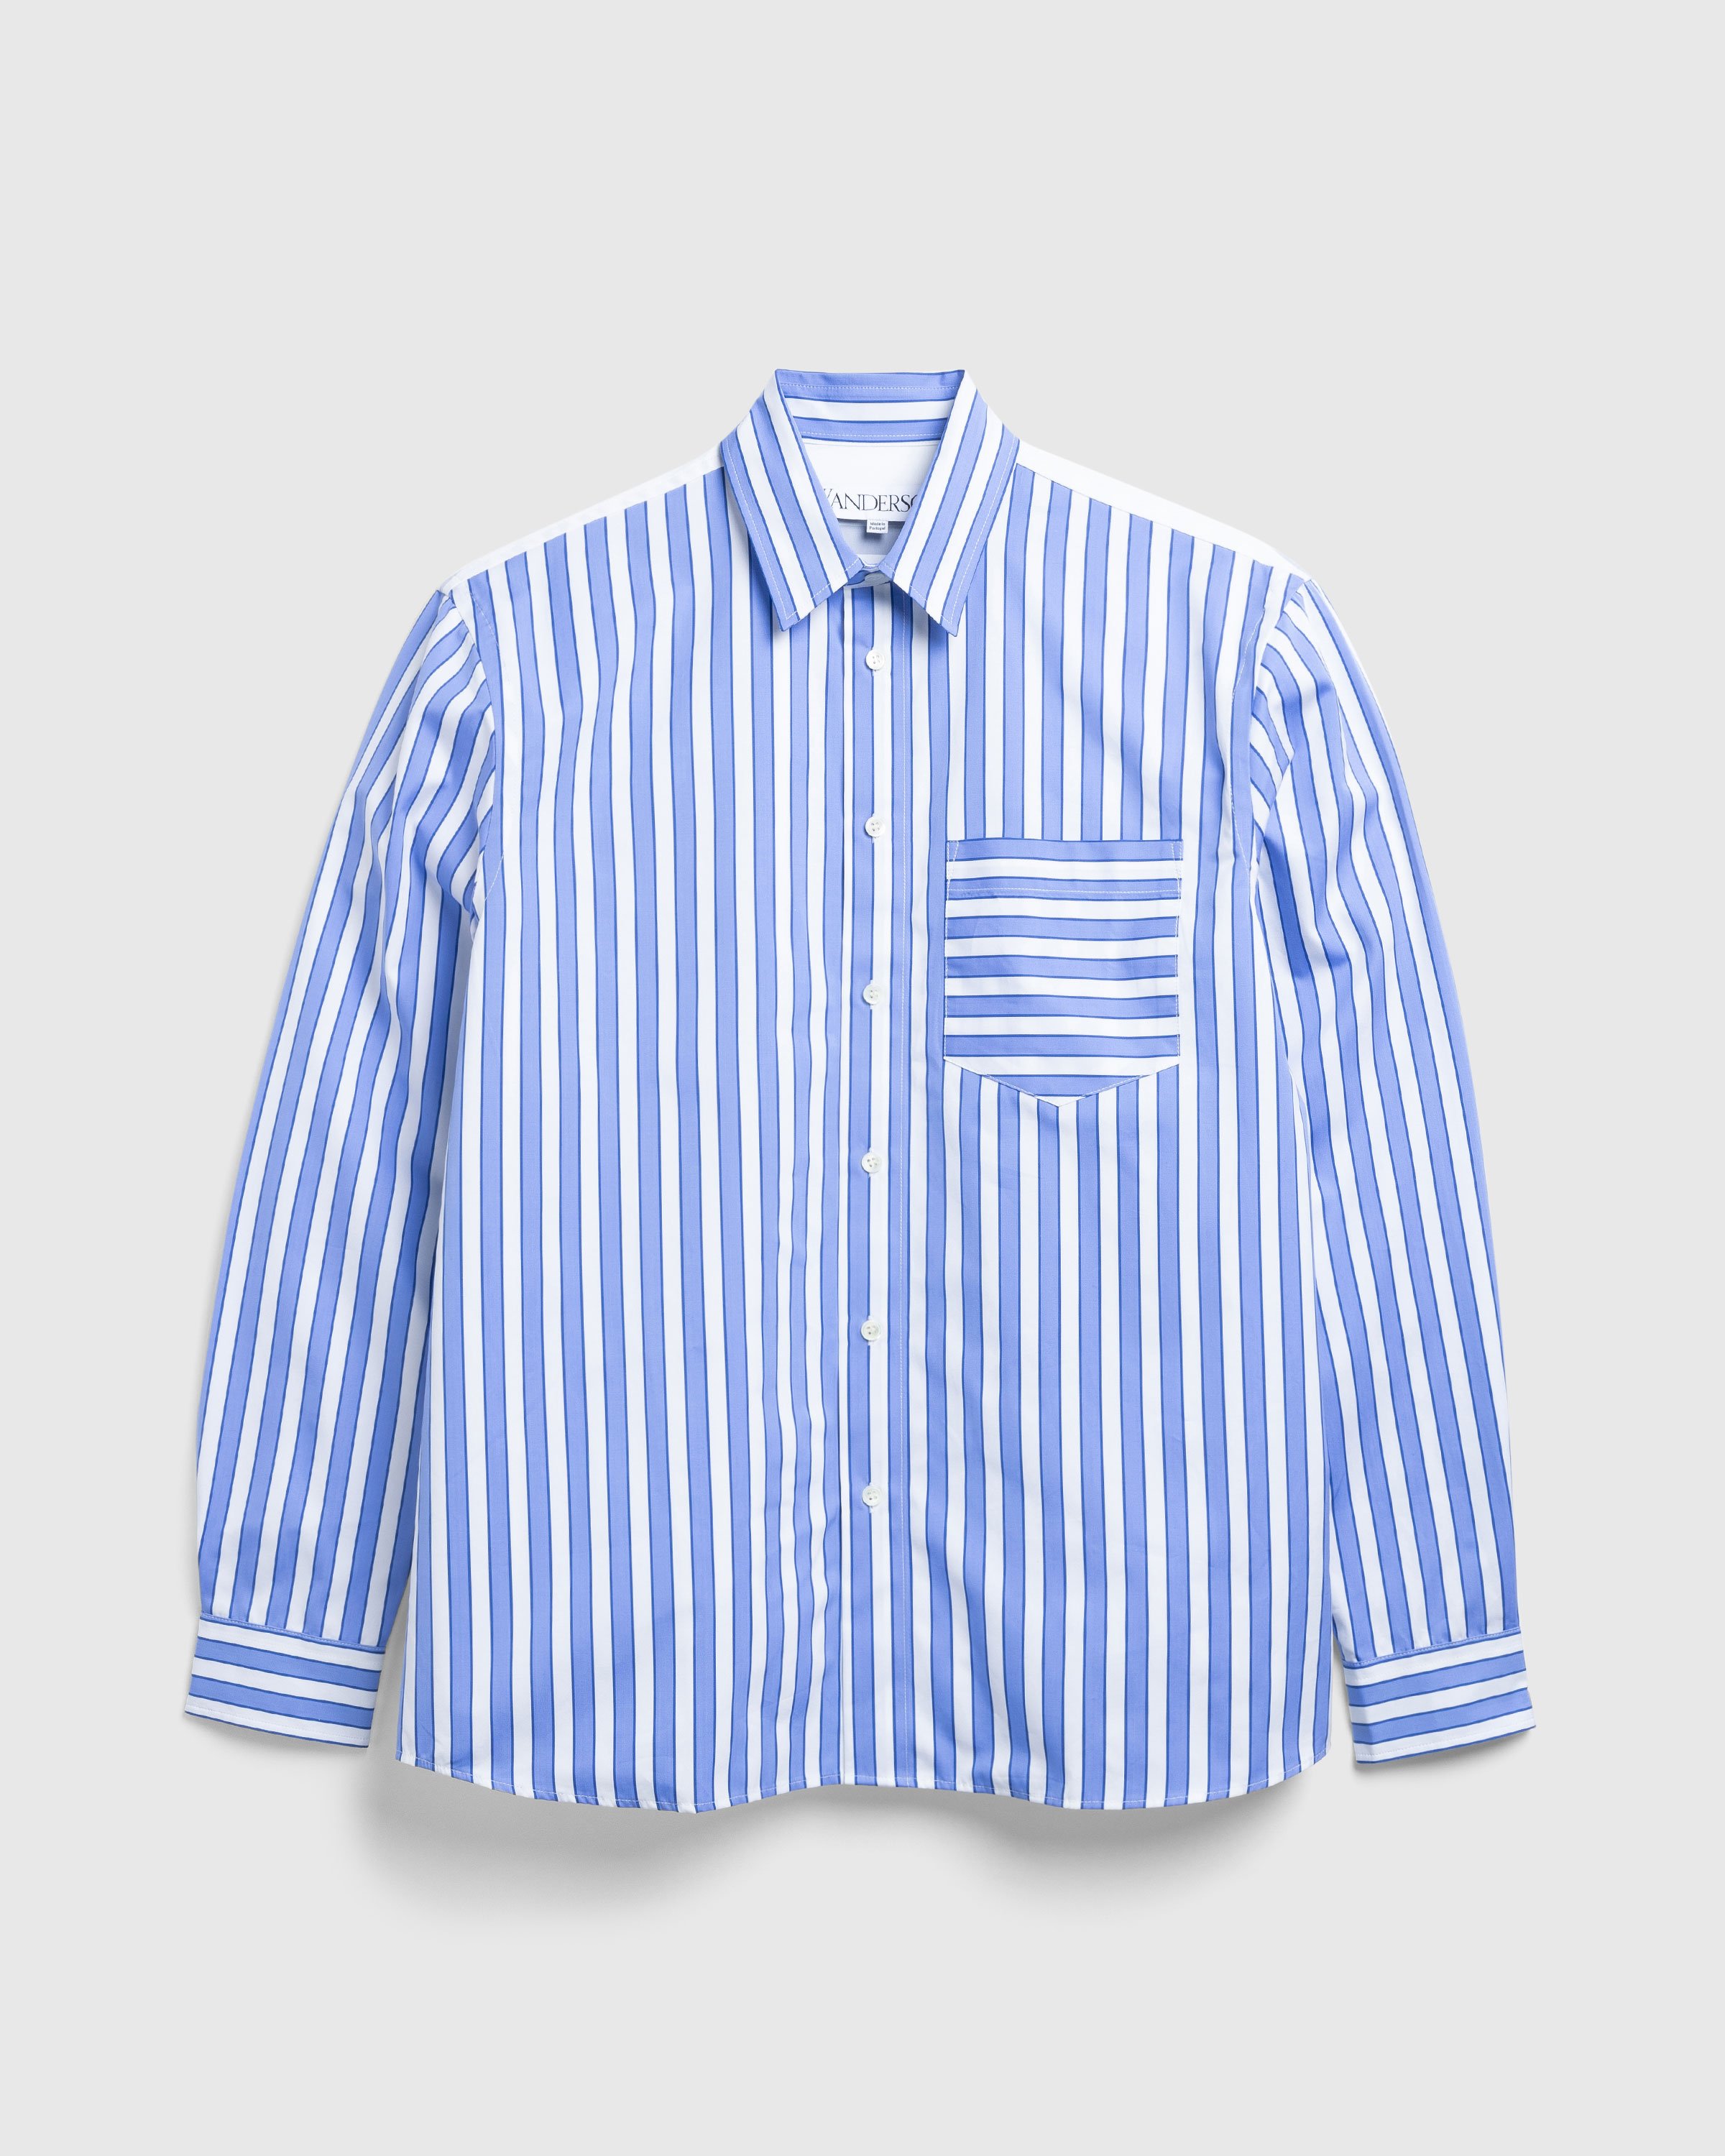 J.W. Anderson - CLASSIC FIT PATCHWORK SHIRT - Clothing - Blue - Image 1